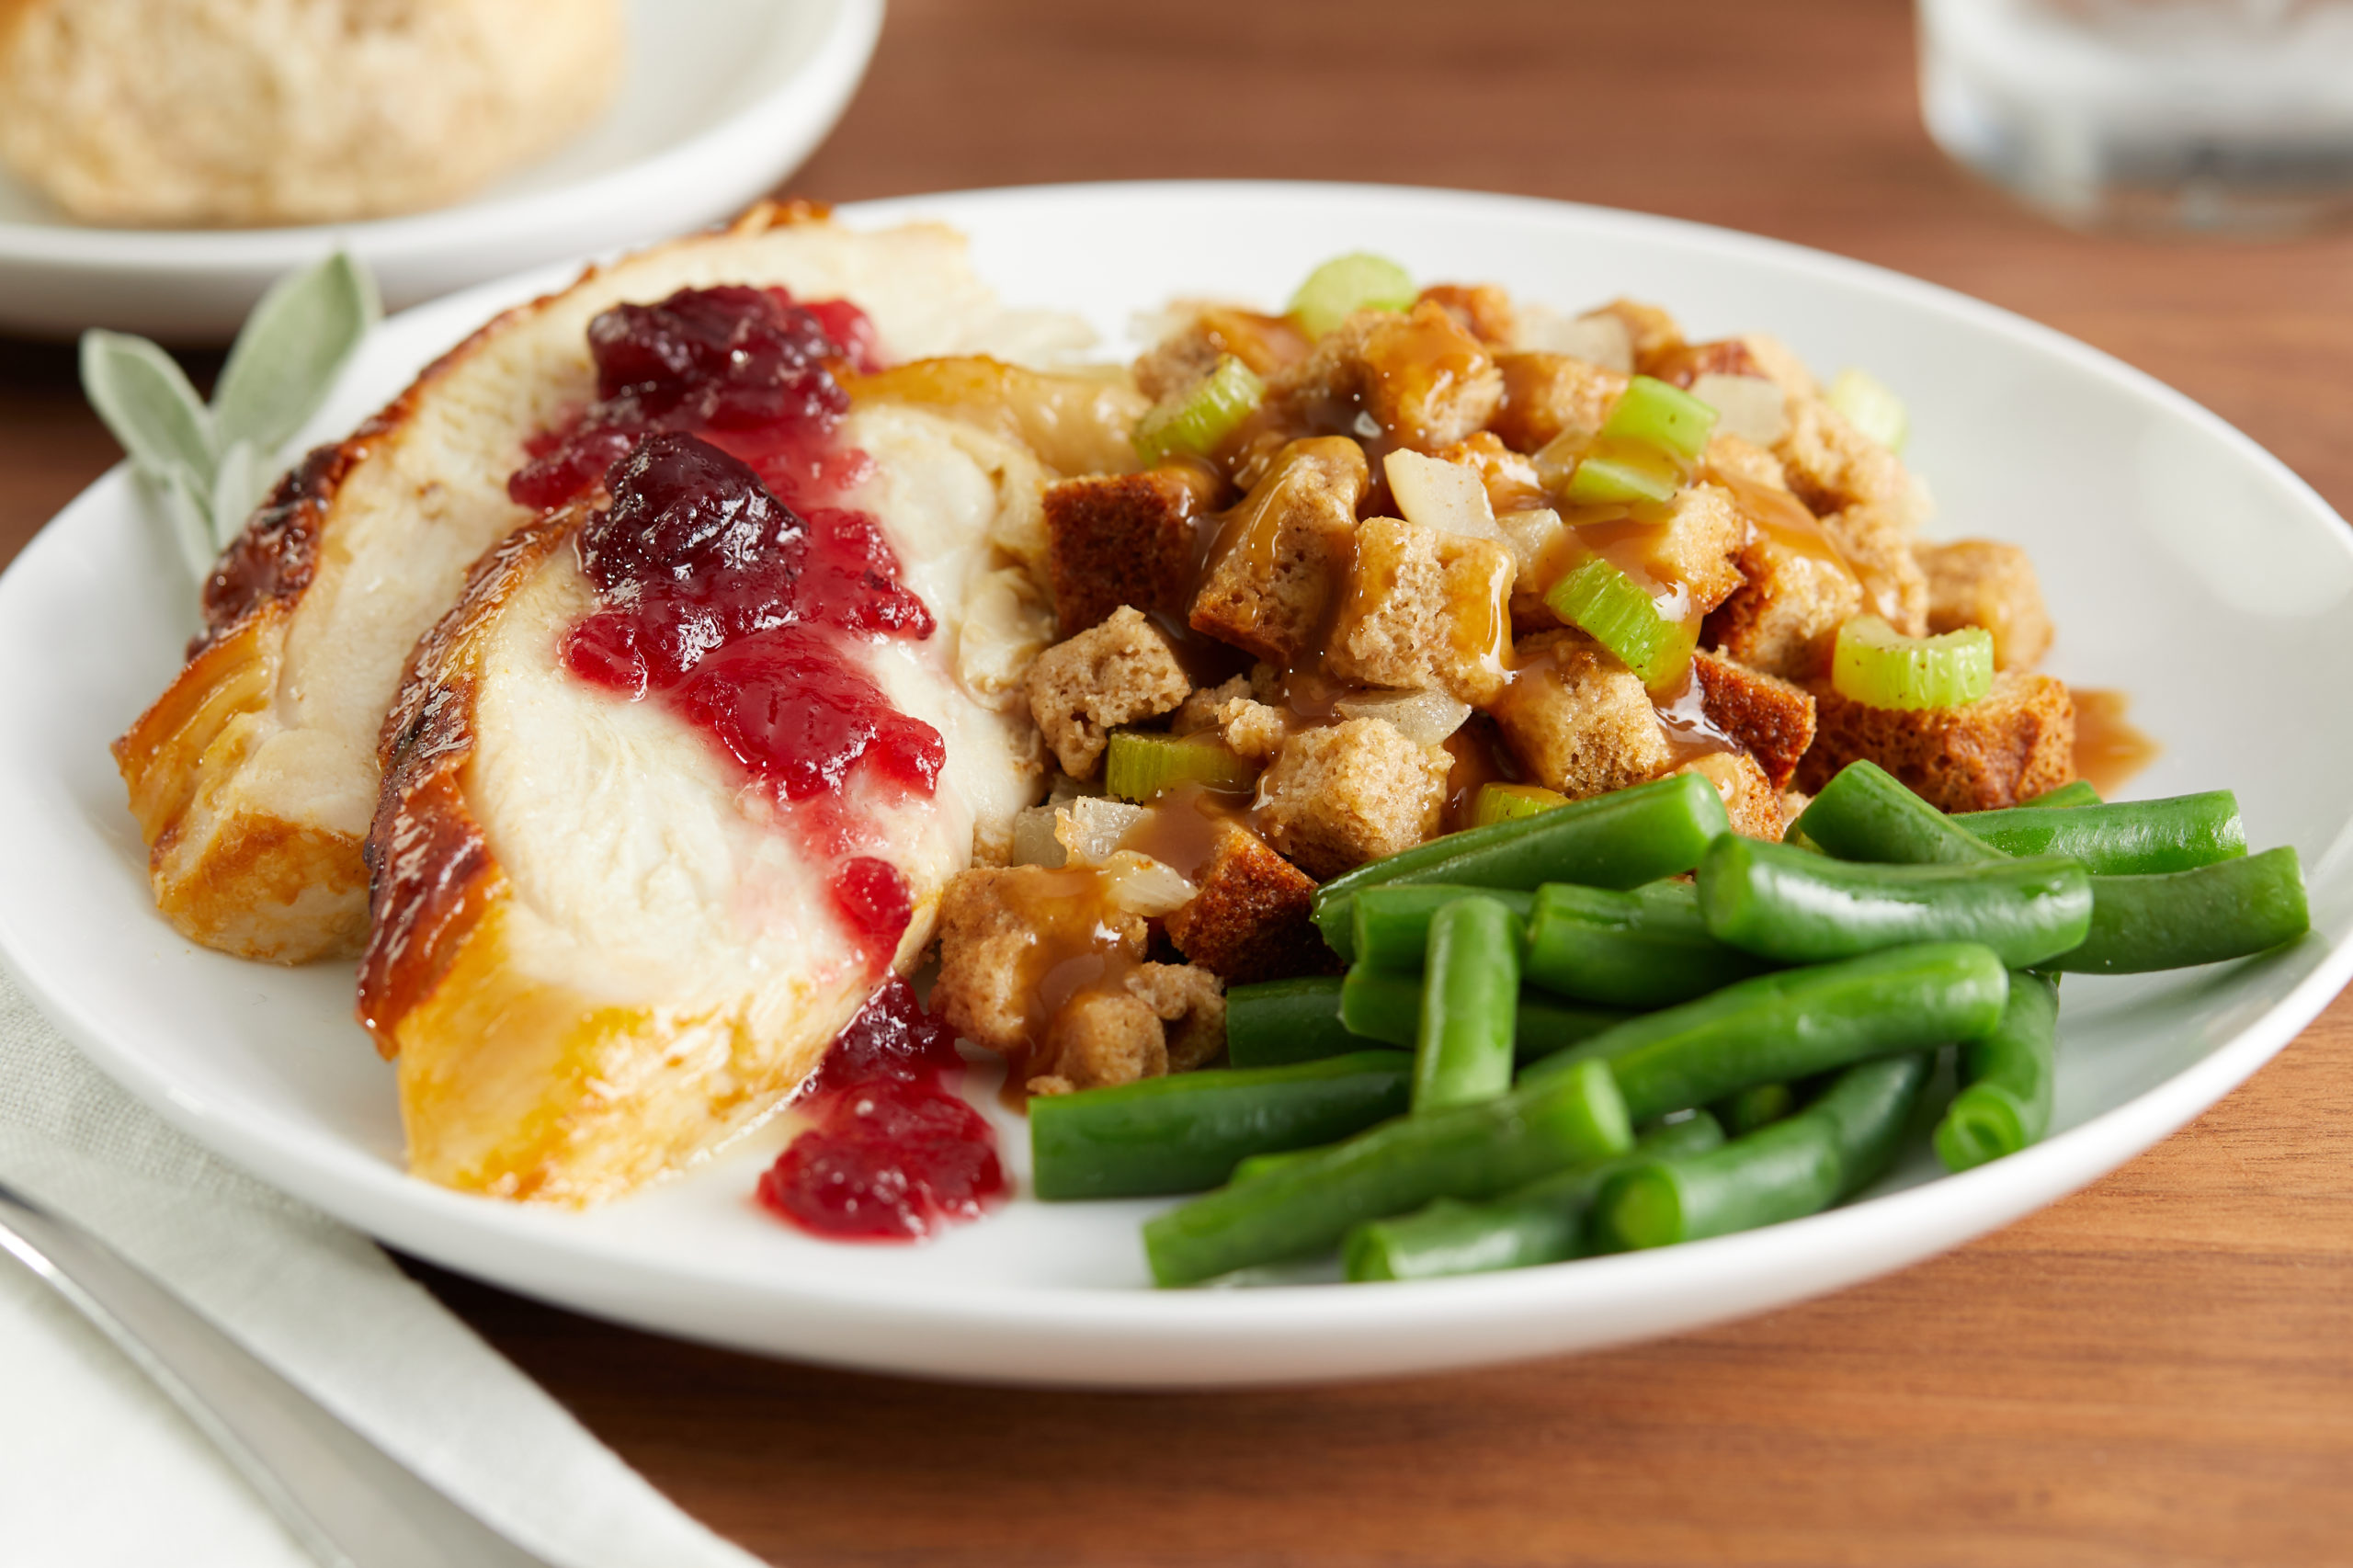 Roast turkey dinner with green beans and stuffing